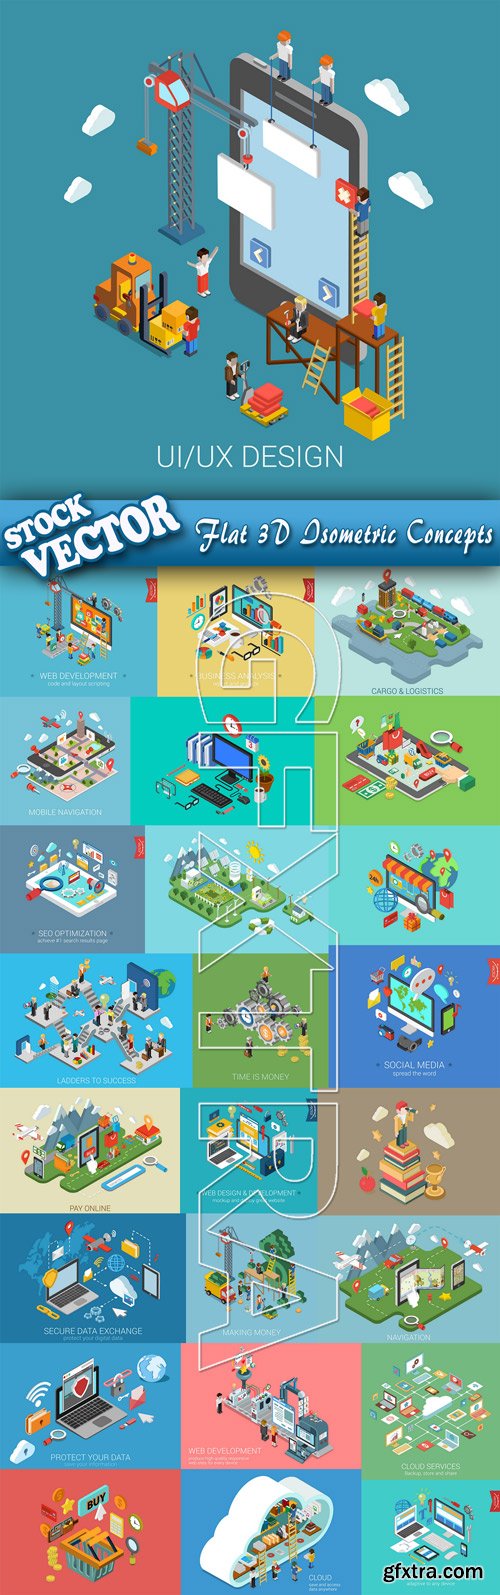 Stock Vector - Flat 3d Isometric Concepts, 25EPS